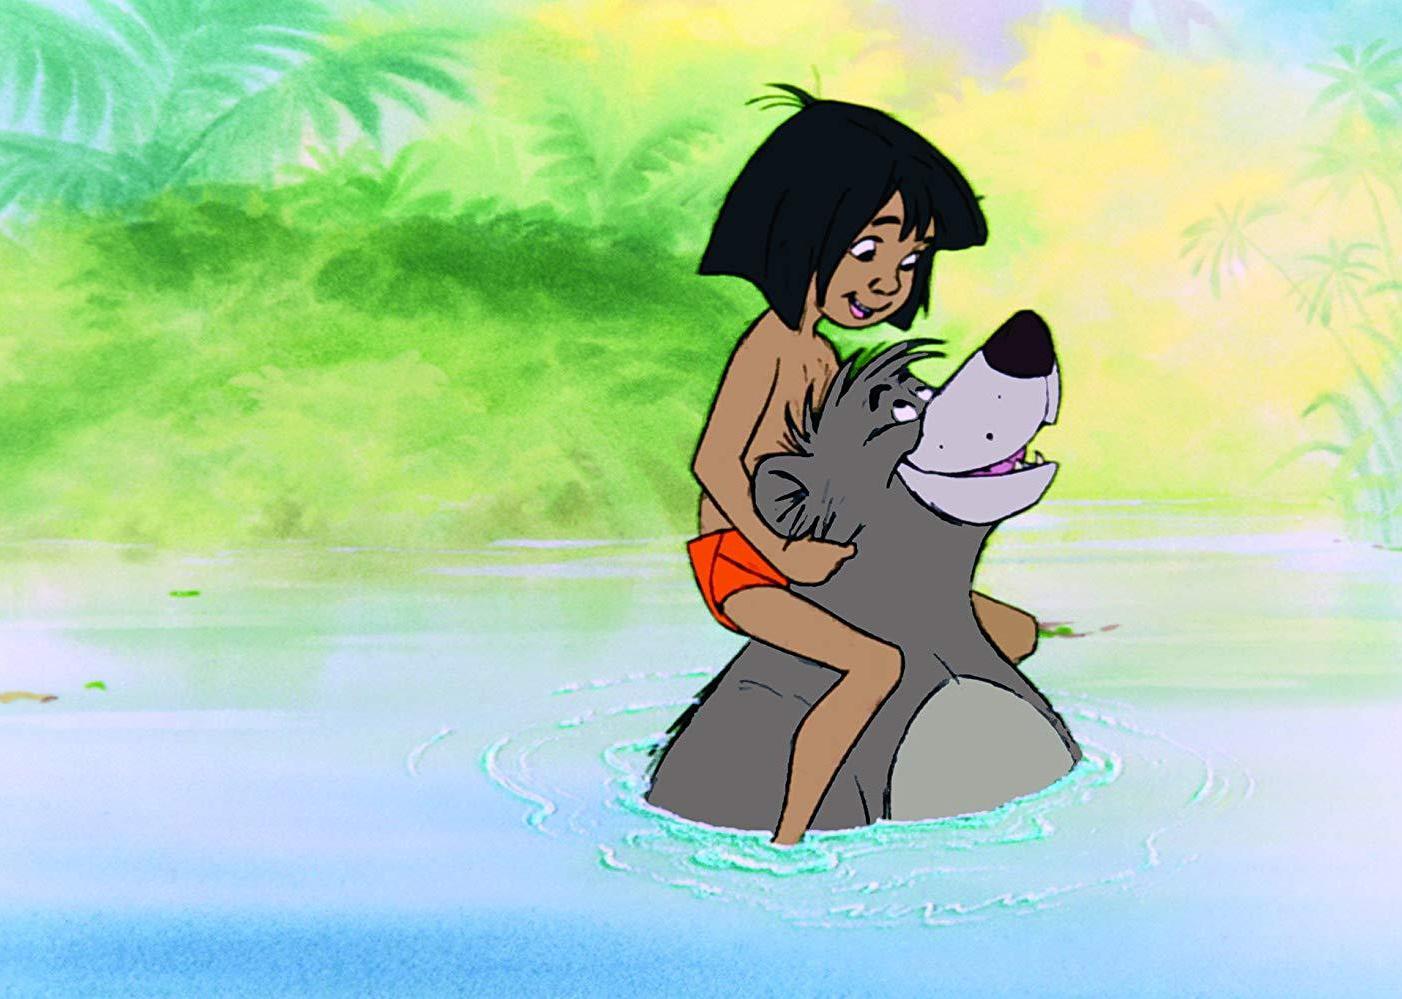 A cartoon of a little boy riding on the back of a bear in the water smiling.